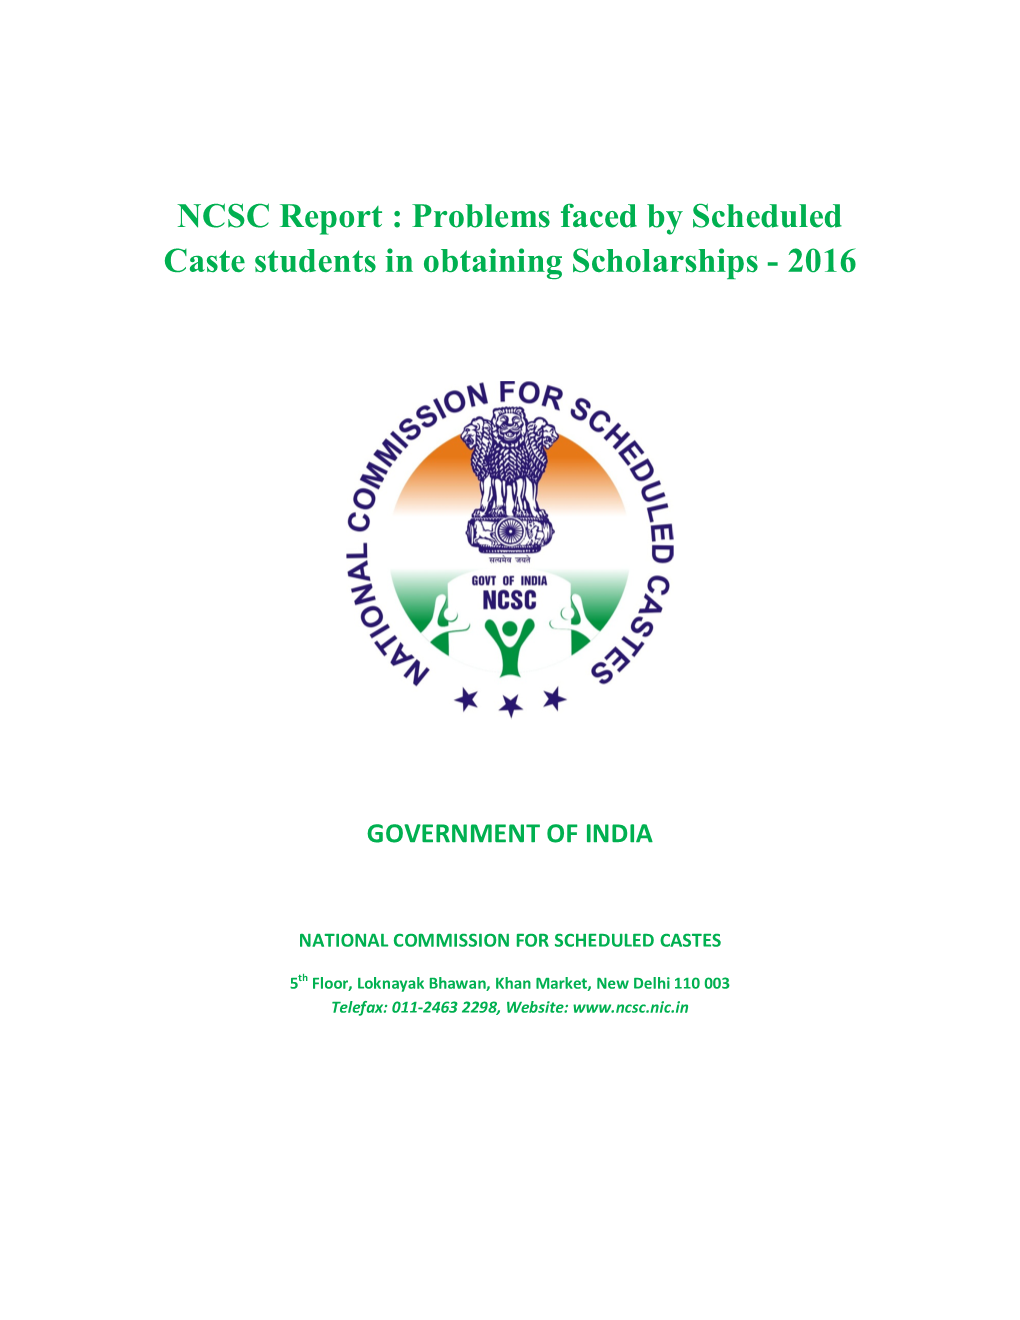 NCSC Report : Problems Faced by Scheduled Caste Students in Obtaining Scholarships - 2016